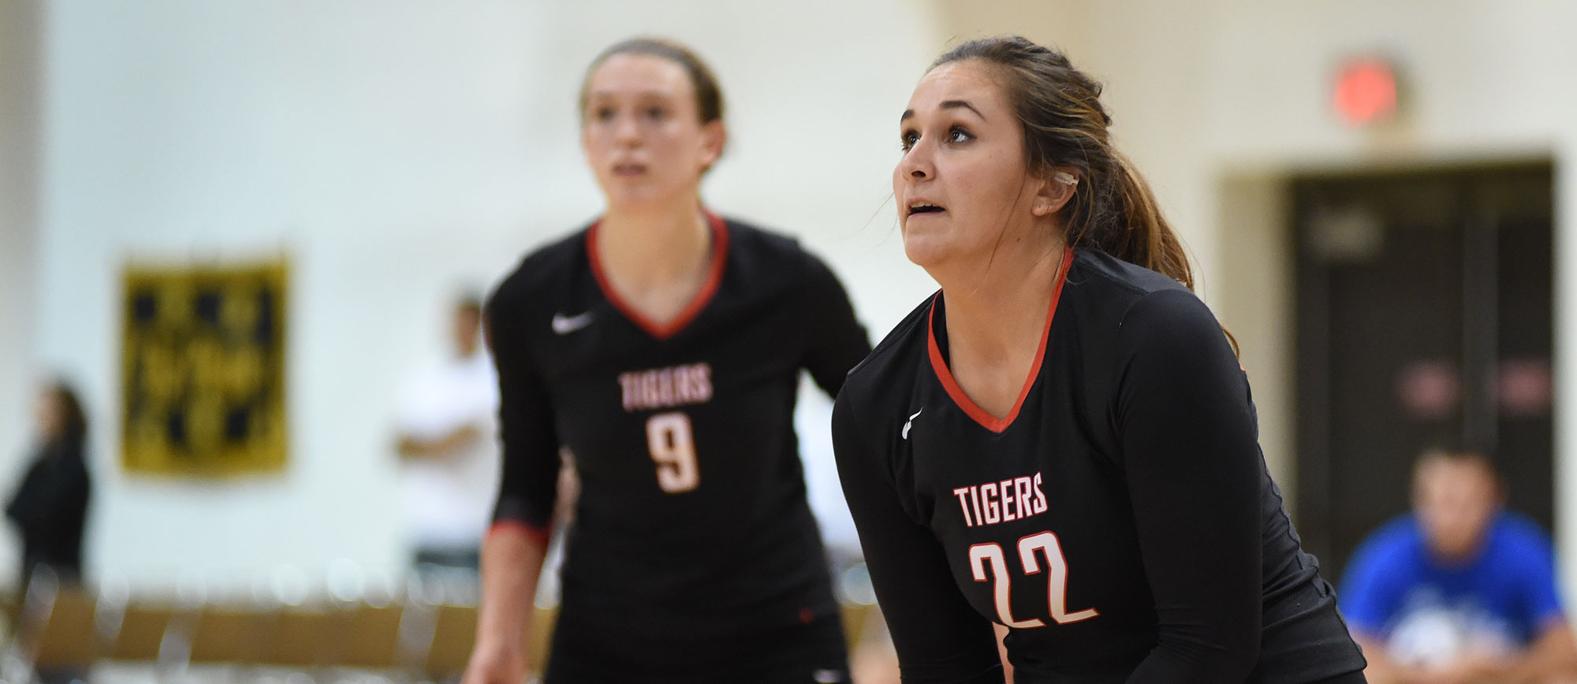 Jenny Lehman and the Tigers pulled away from Wooster for a 3-0 Homecoming weekend win. File Photo | Nick Falzerano